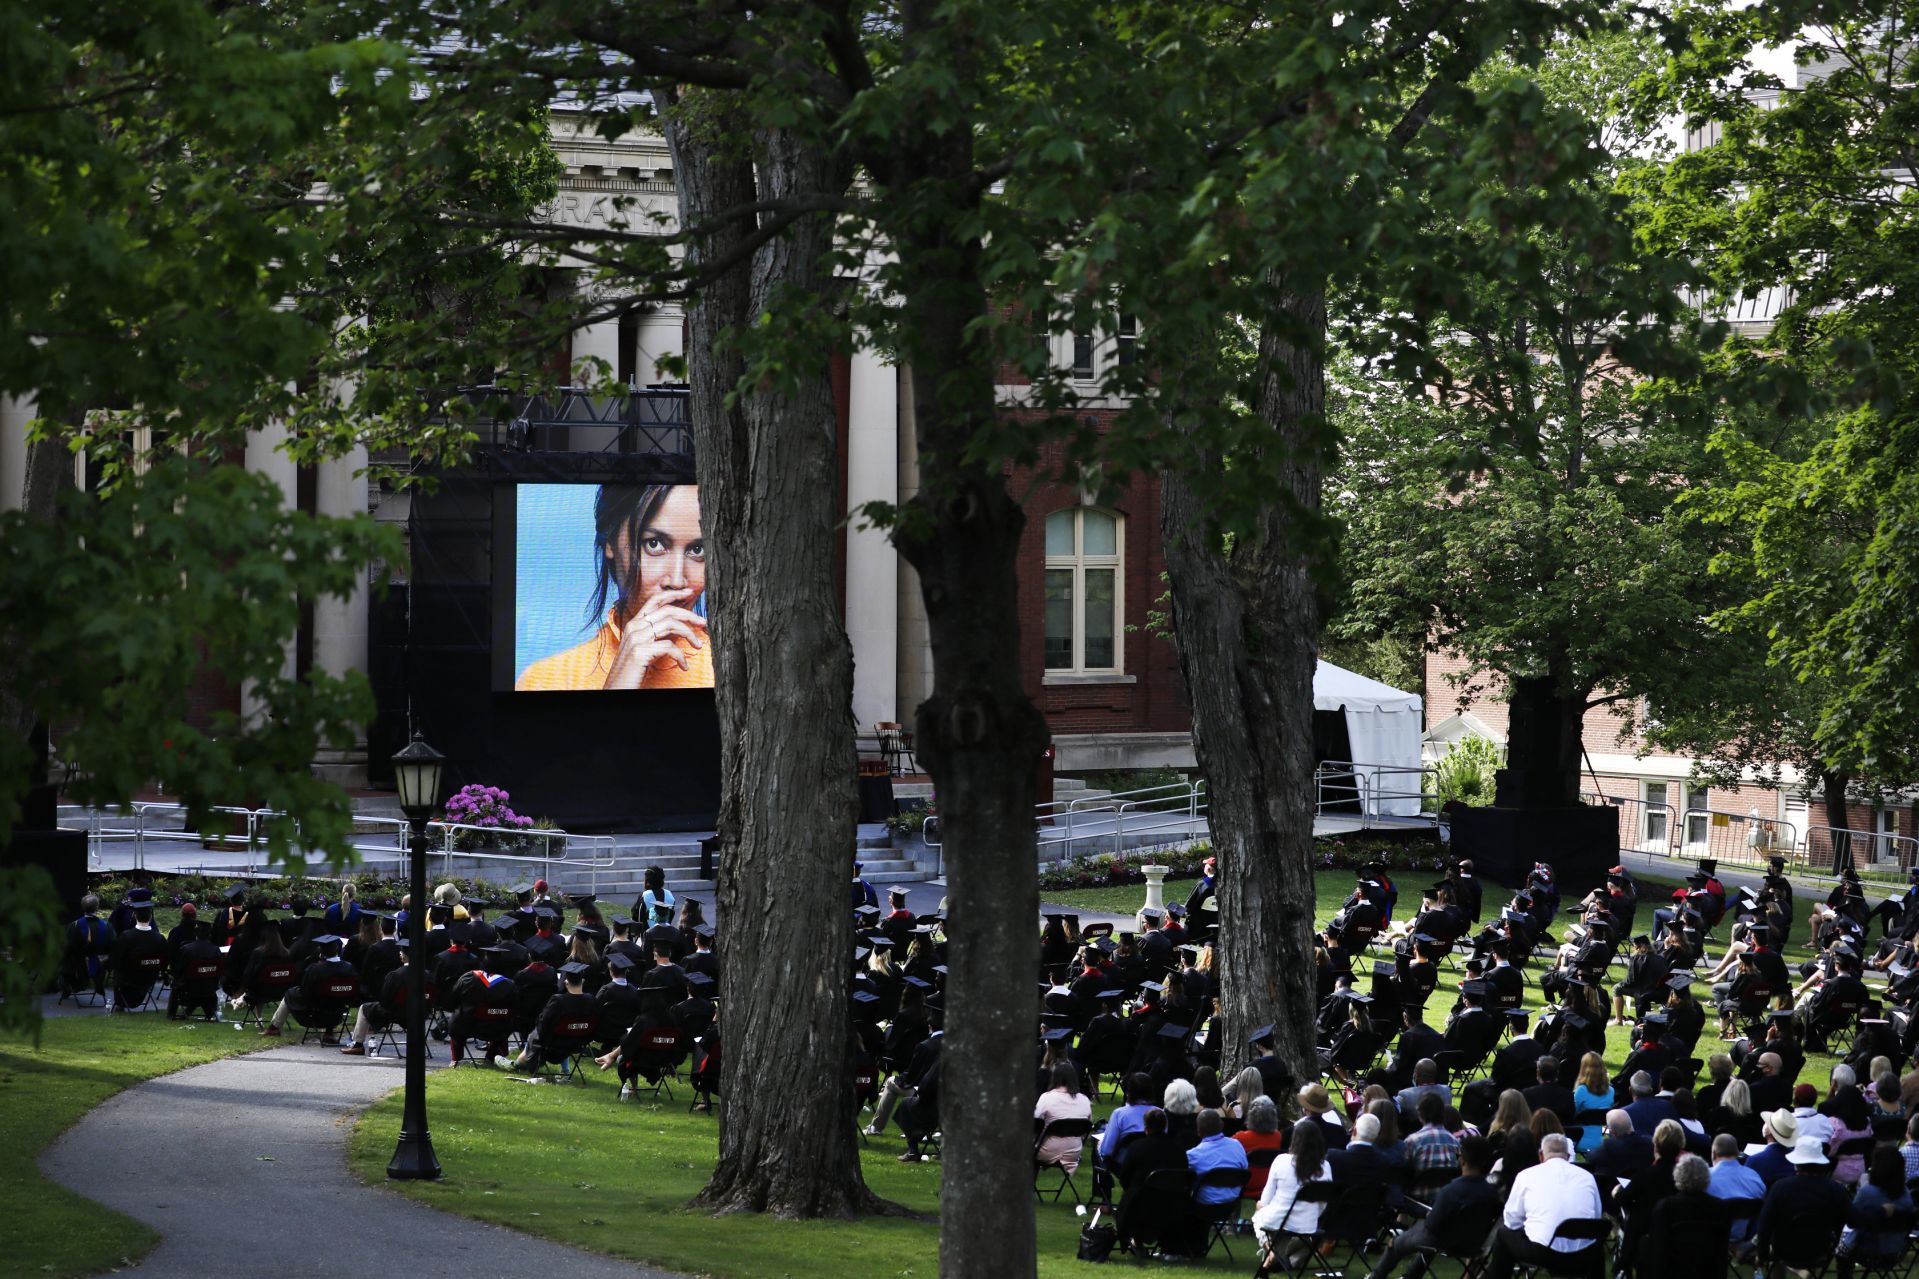 During the morning Commencement ceremony on May 27, 2021, the video monitor on the Coram Library Terrace displays a photograph of Rhiannon Giddens as her honorary degree citation is read. (Theophil Syslo/Bates College)